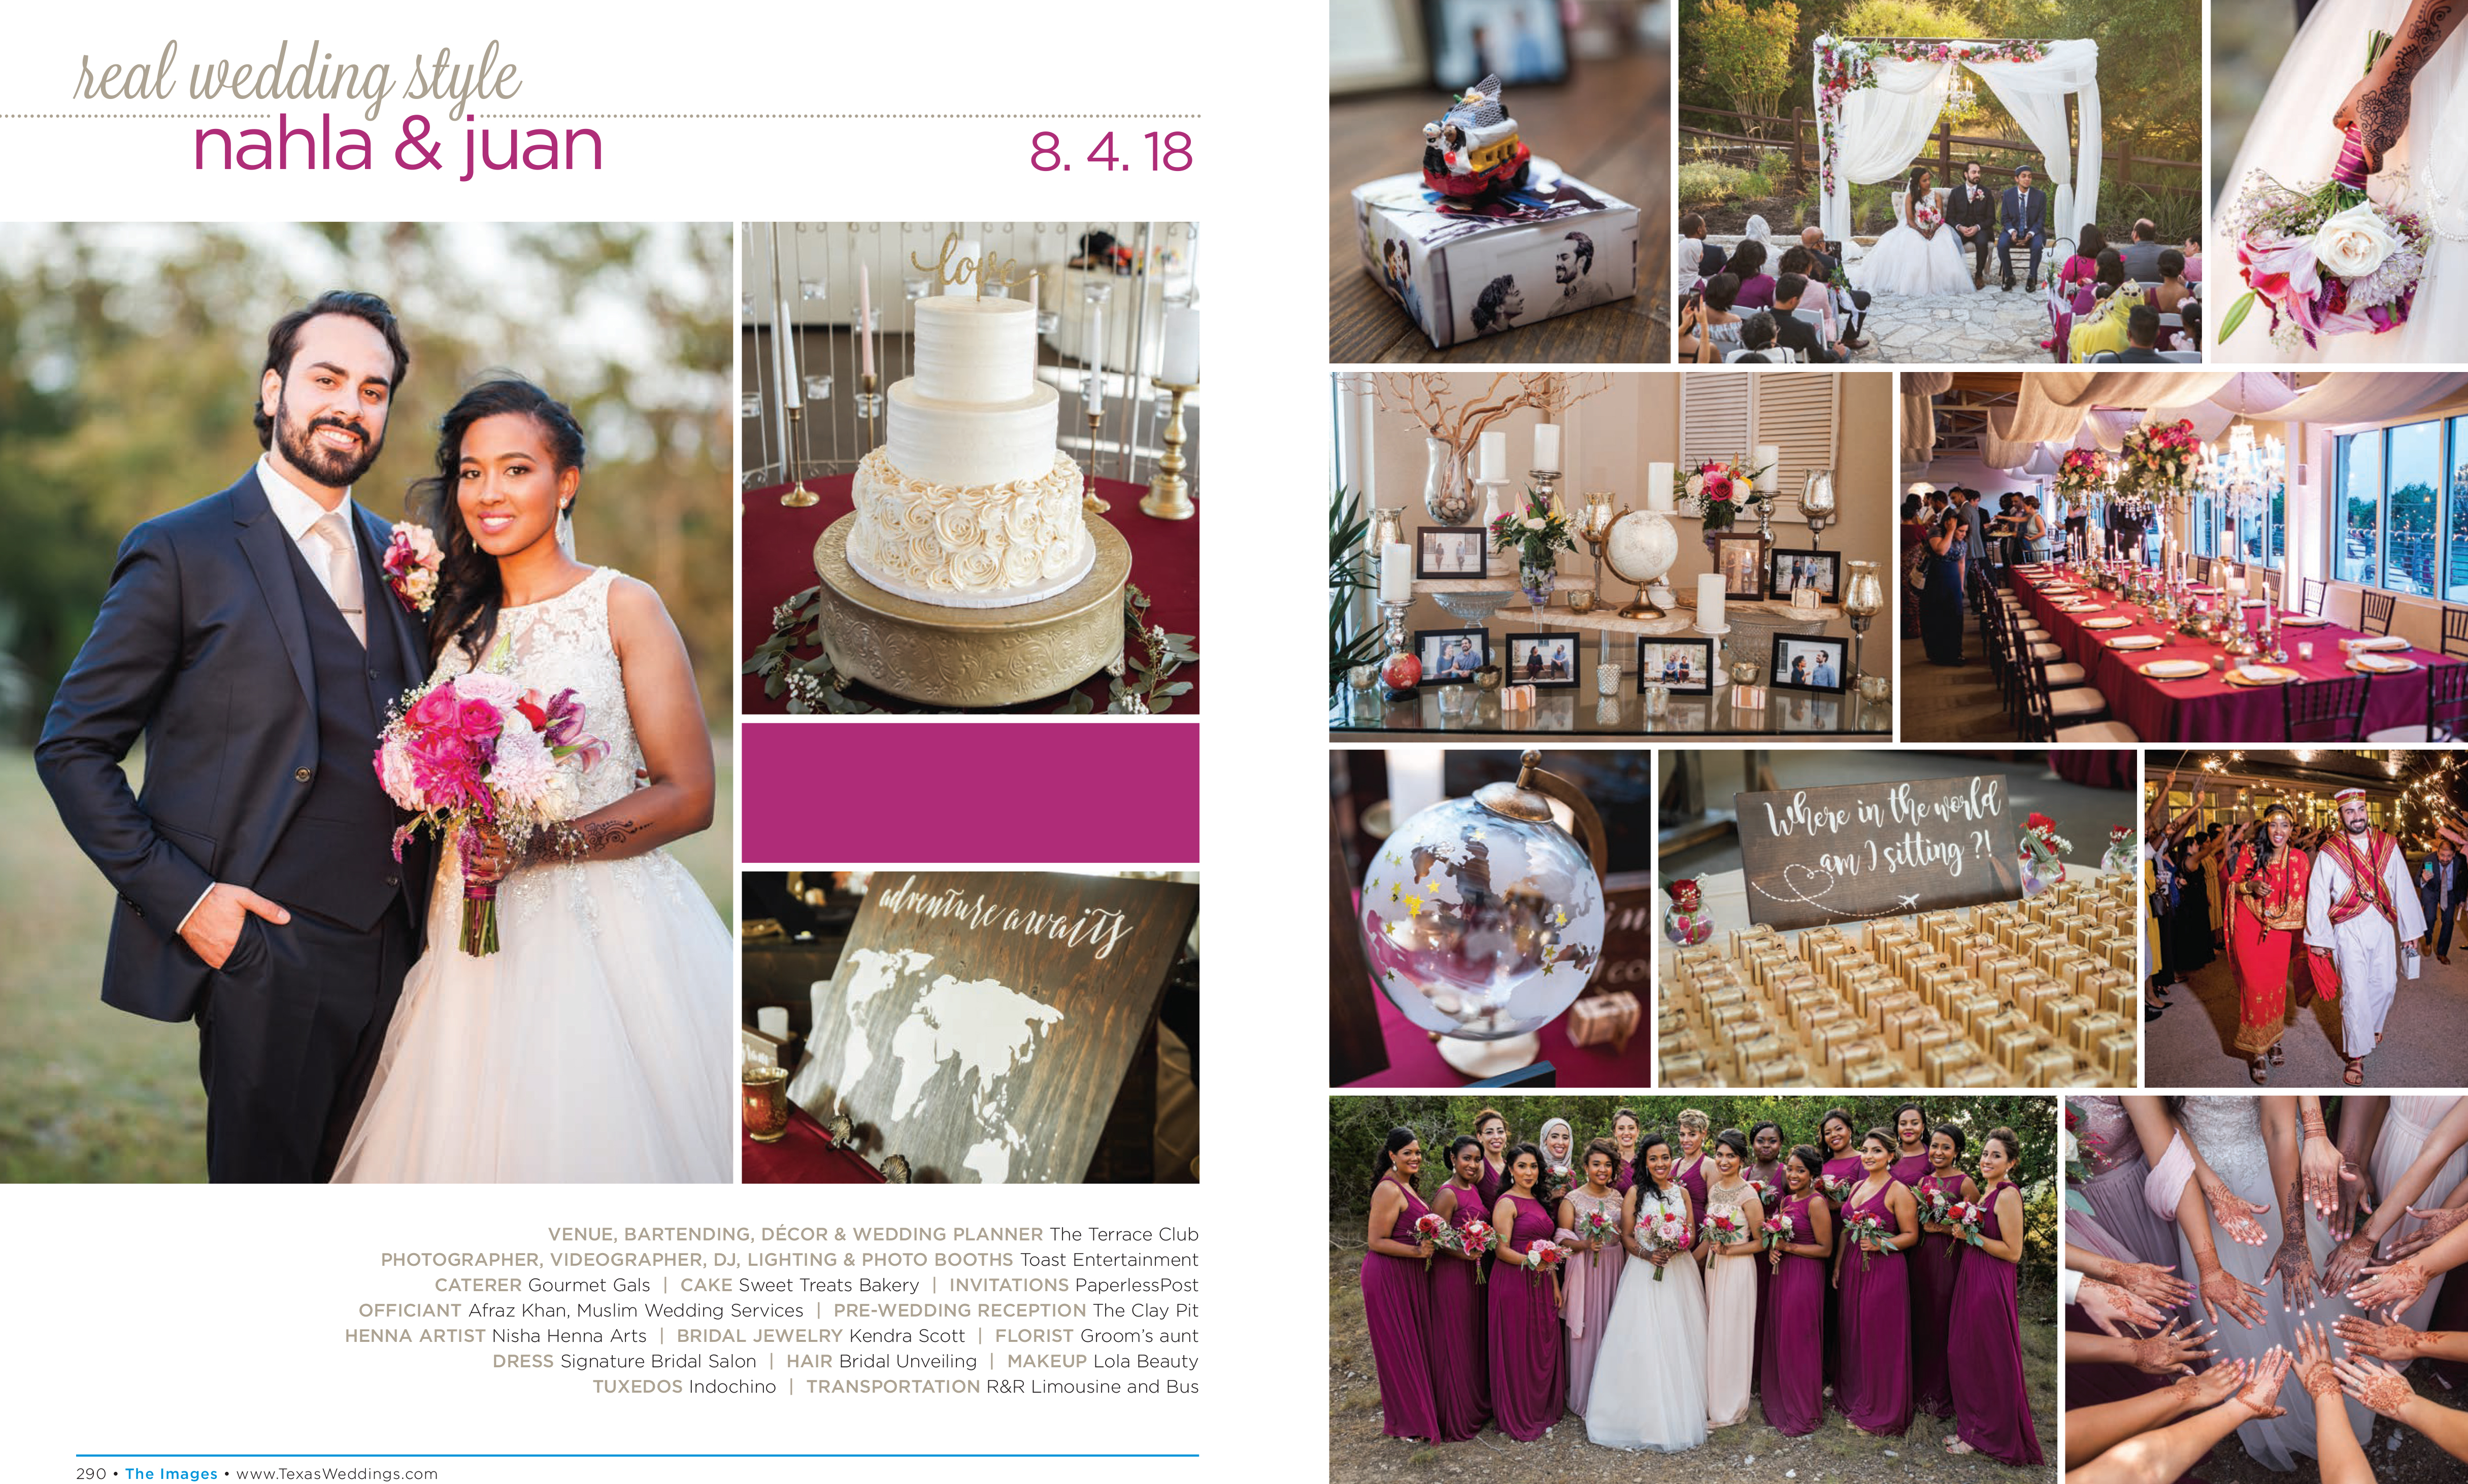 Nahla & Juan in their Real Wedding Page in the Spring/Summer 2019 Texas Wedding Guide